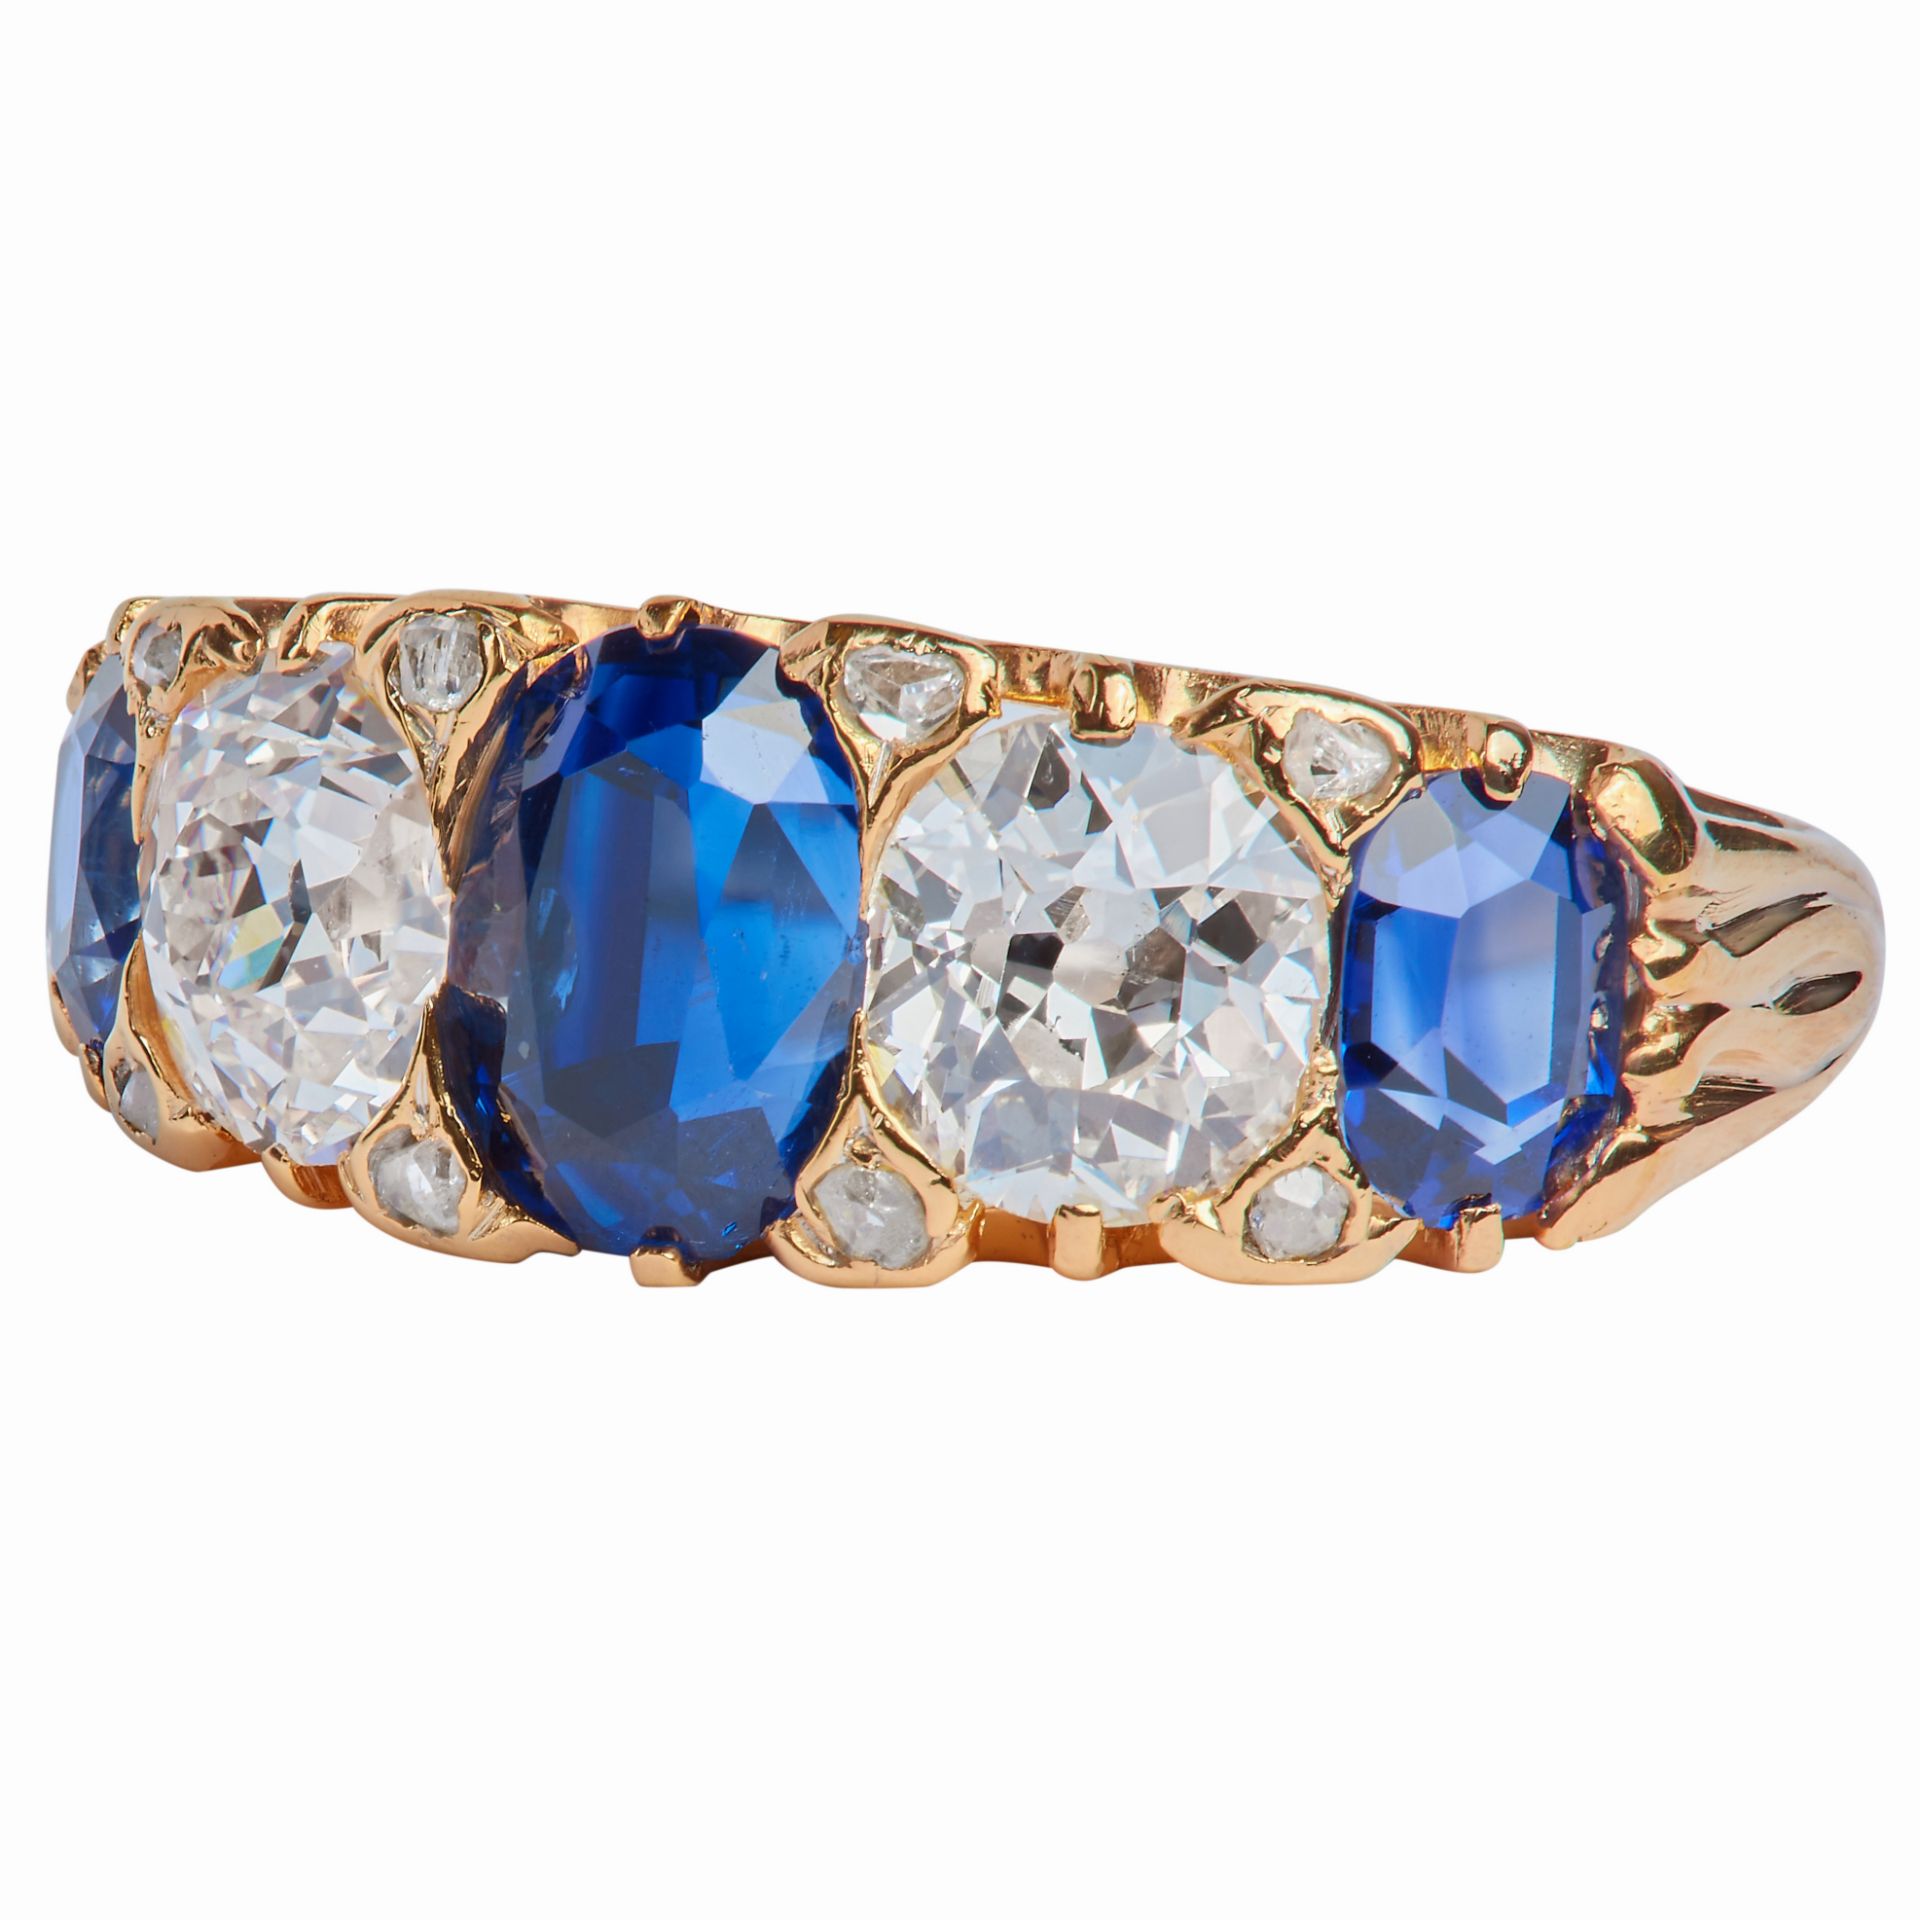 IMPORTANT SAPPHIRE AND DIAMOND 5-STONE RING - Image 2 of 2